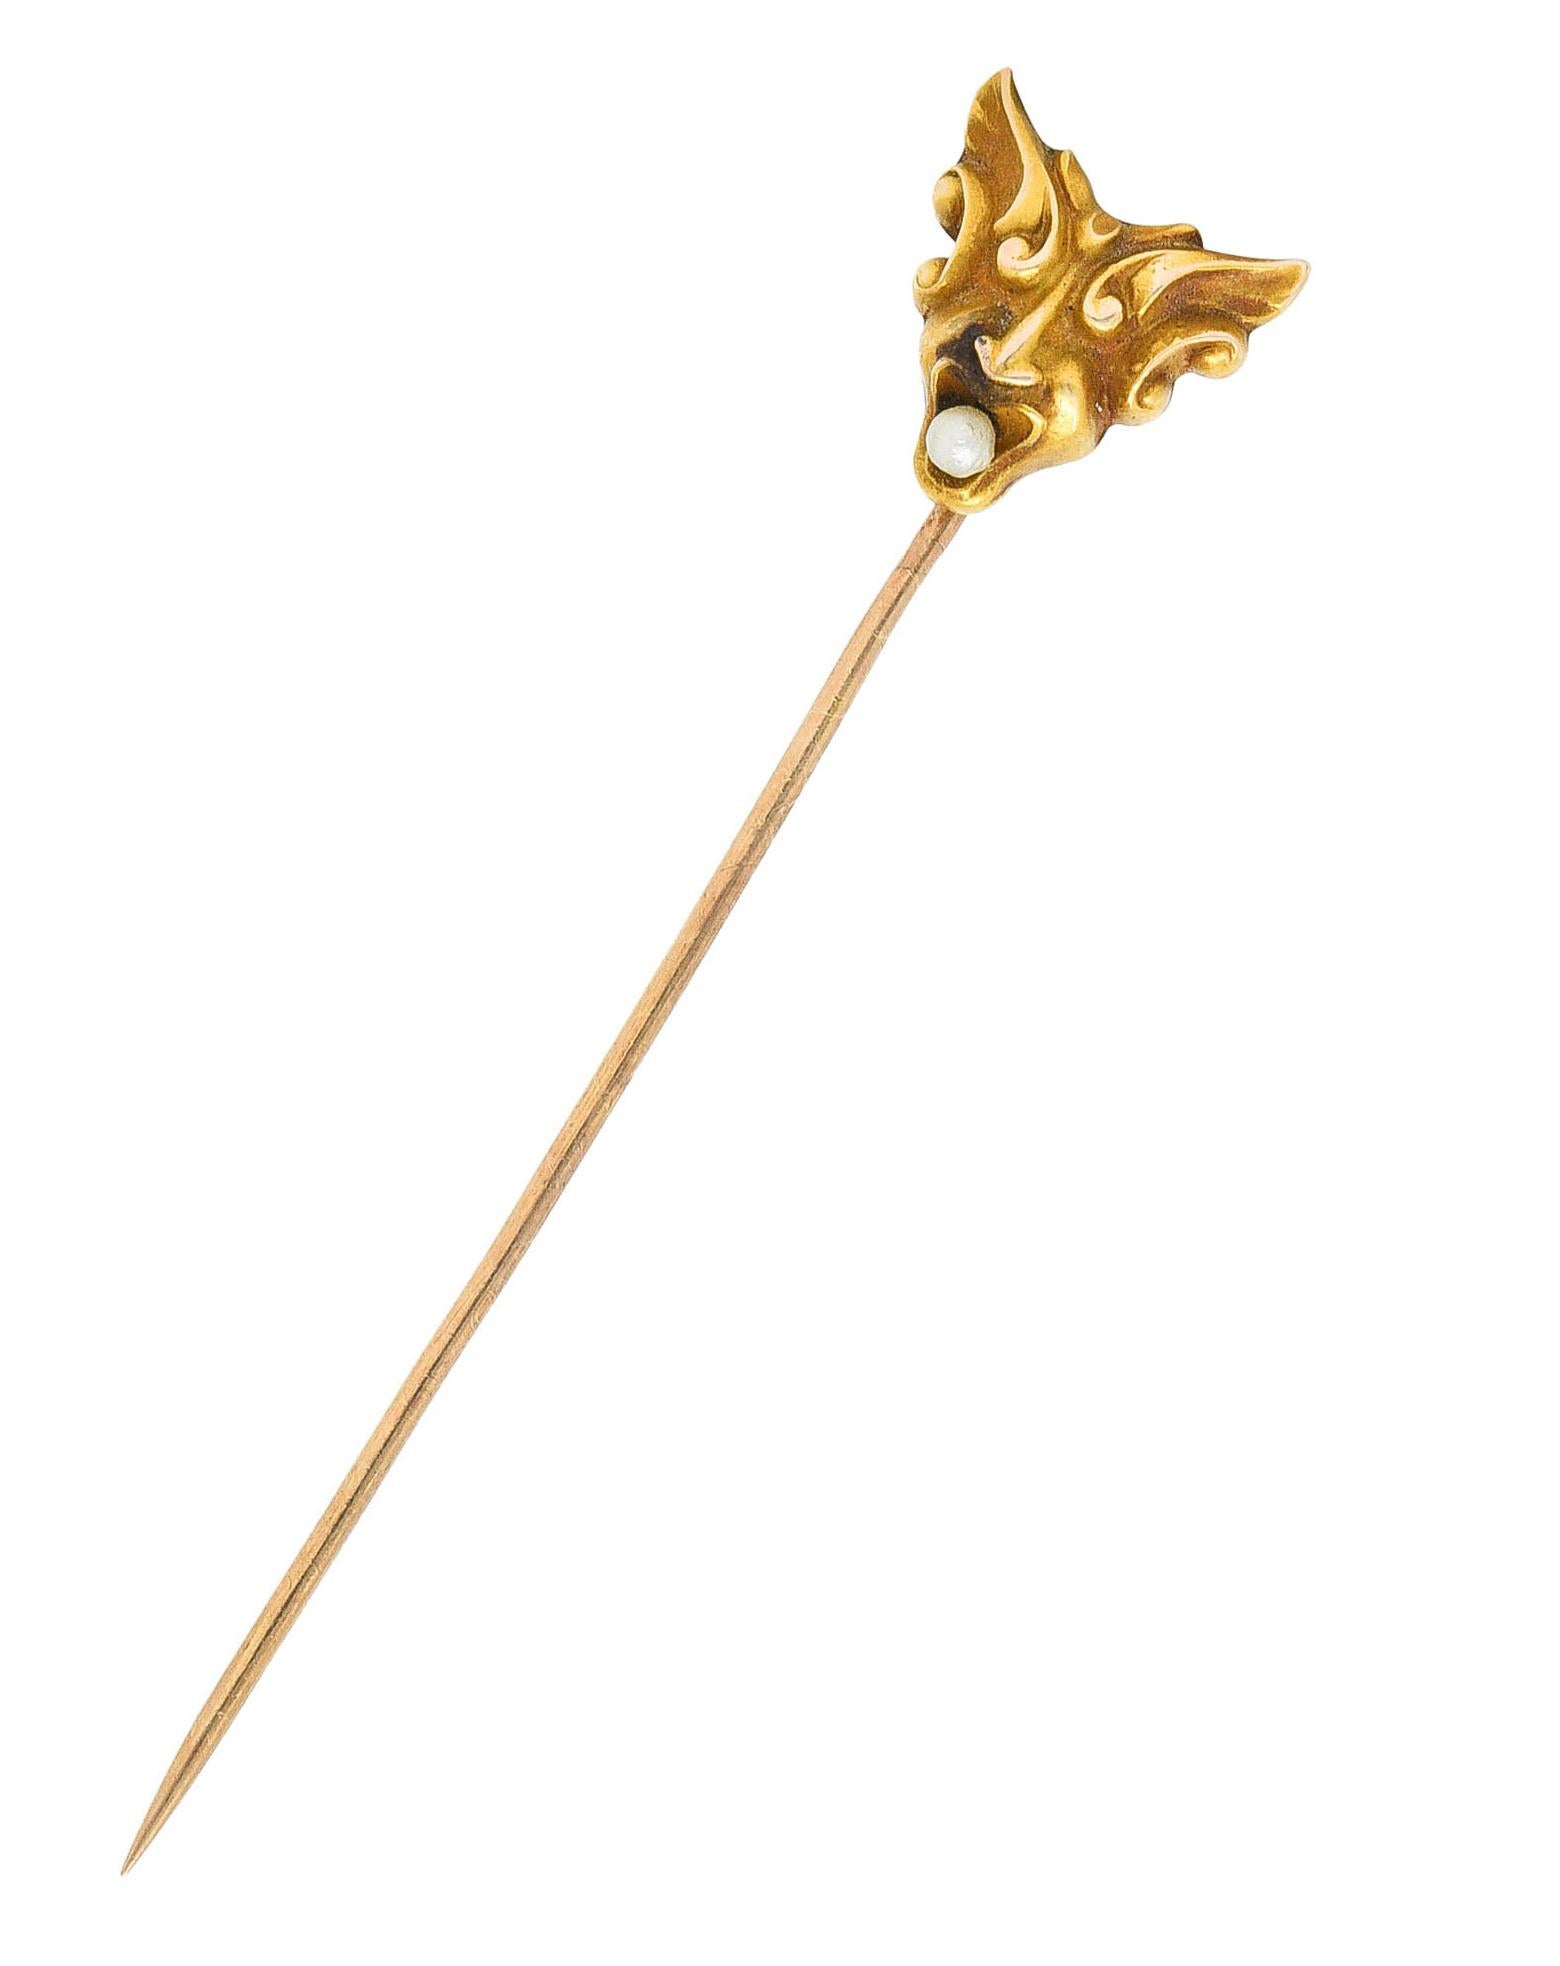 Stickpin designed as stylized winged head of Hermes - messenger of the gods

With whiplash style wings and 2.0 mm pearl in mouth 

Pearl is white in body color with good luster

Head: 1/2 x 1/2 inch

Total length: 2 1/2 inches

Total weight: 1.3